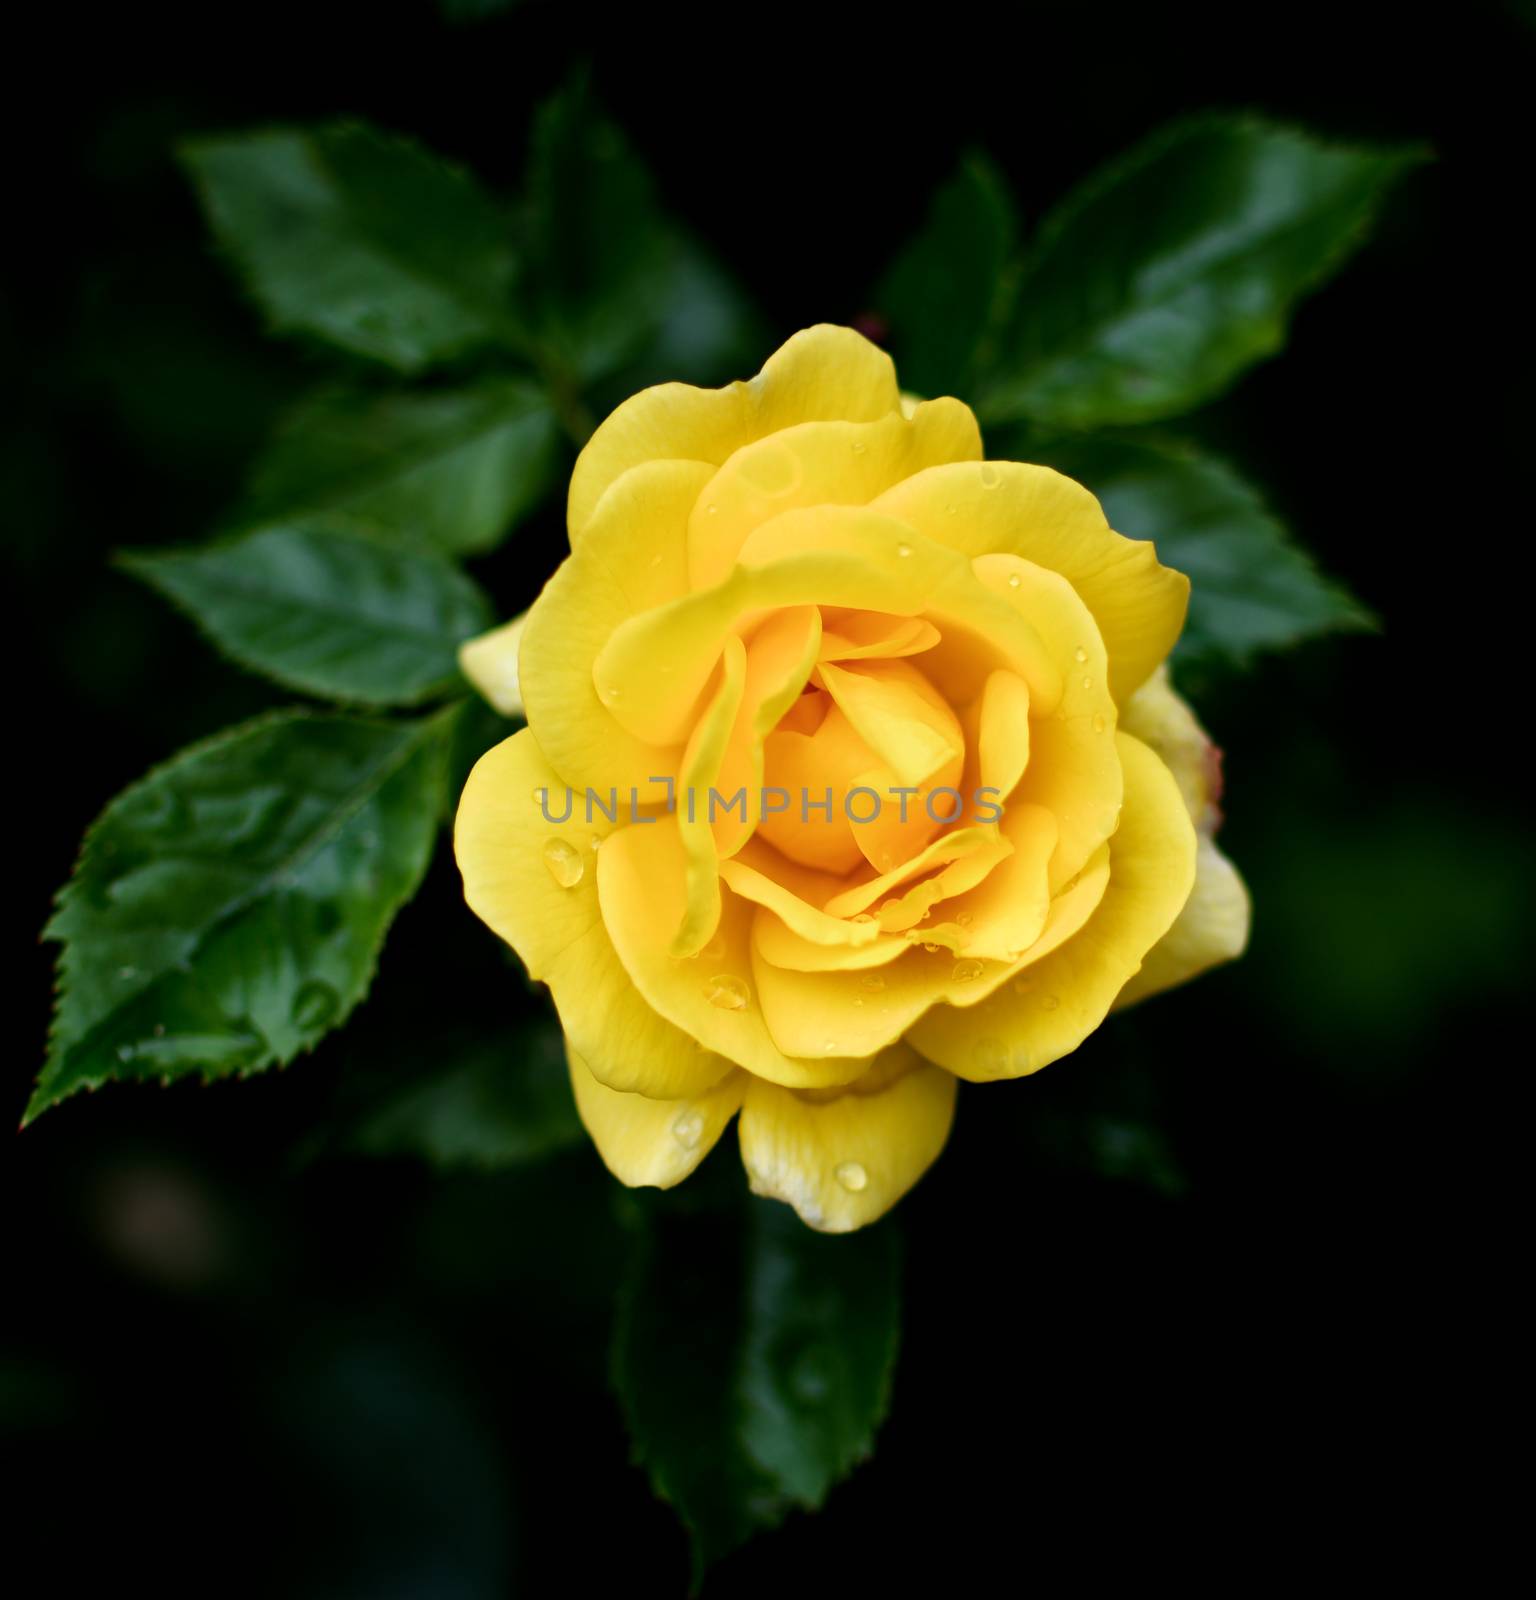 Perfect Single Yellow Rose with Leafs and Water Drops closeup on Blurred Natural background Outdoors. Focus on Centre of Petals